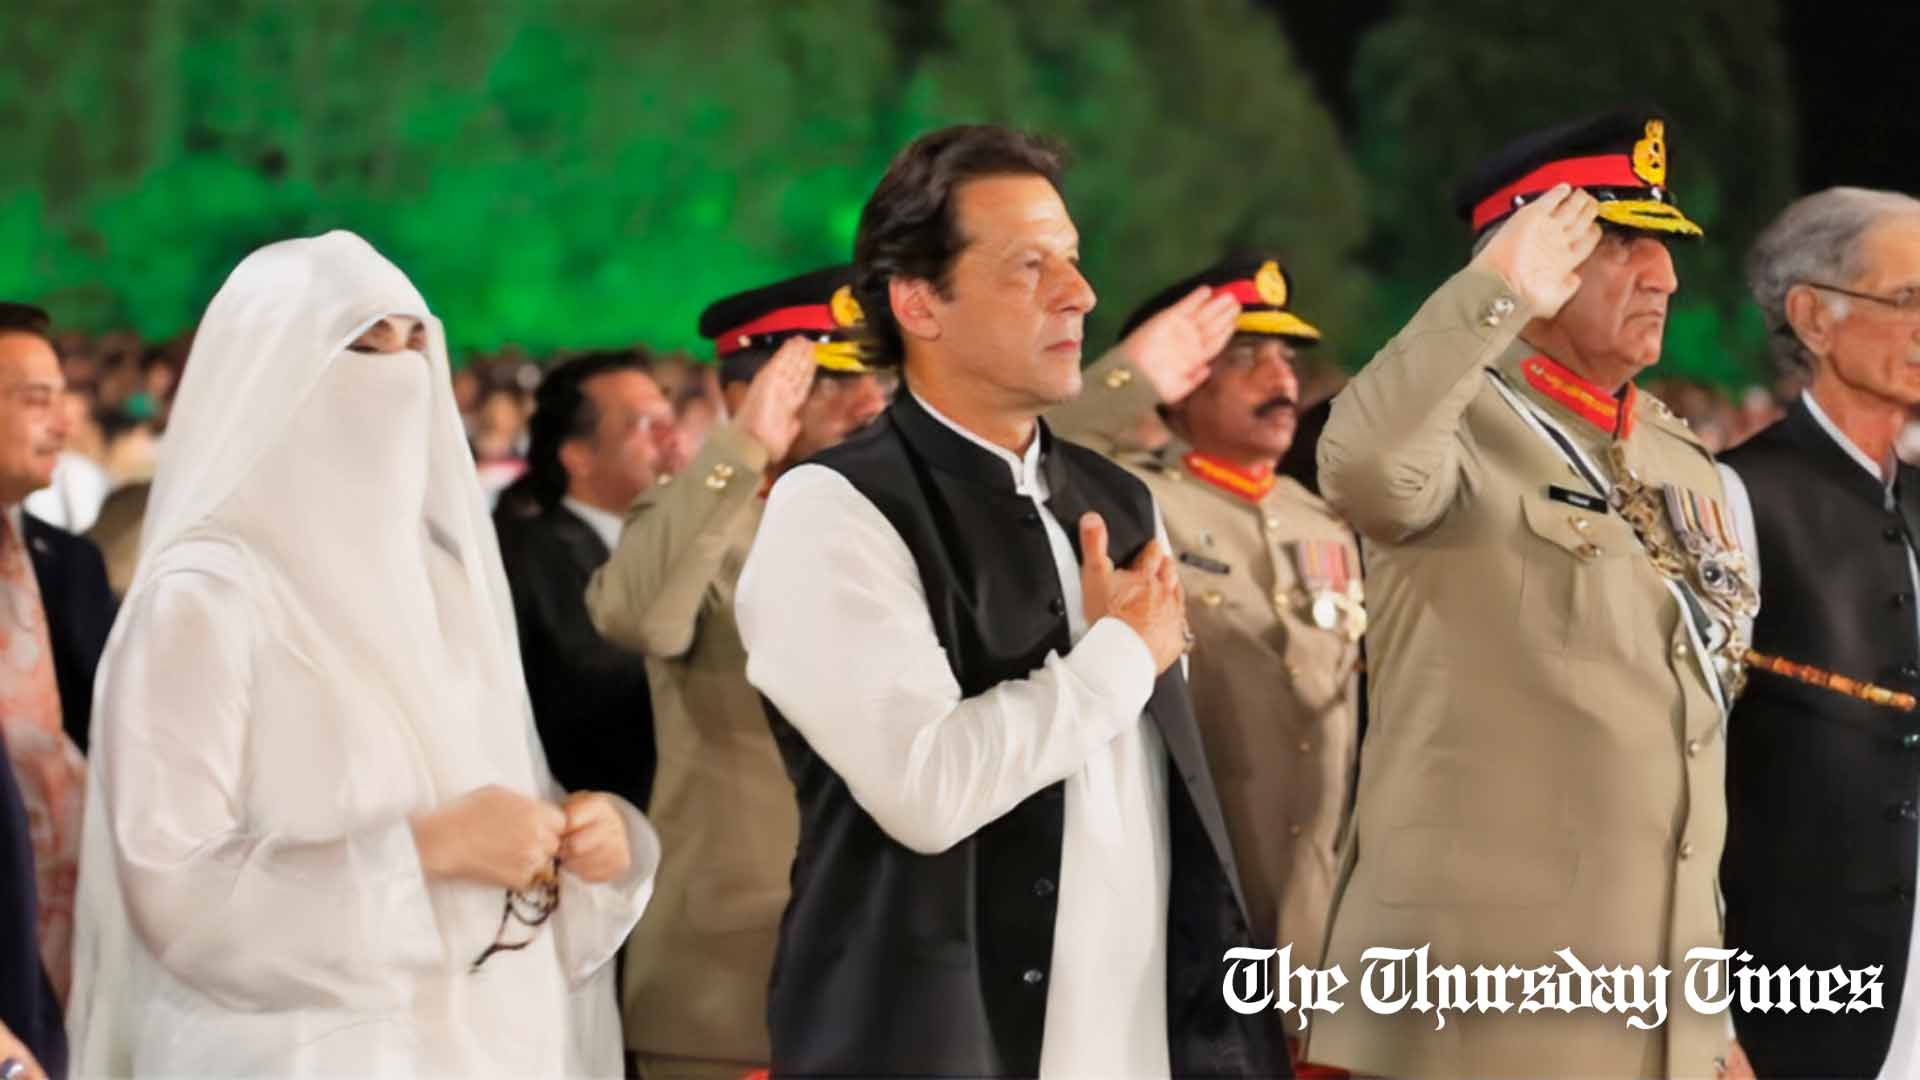 A file photo is shown of former first lady Bushra Maneka (L), PTI chairman Imran Khan (C), and former COAS General Qamar Javed Bajwa on March 23, 2022. — FILE/THE THURSDAY TIMES